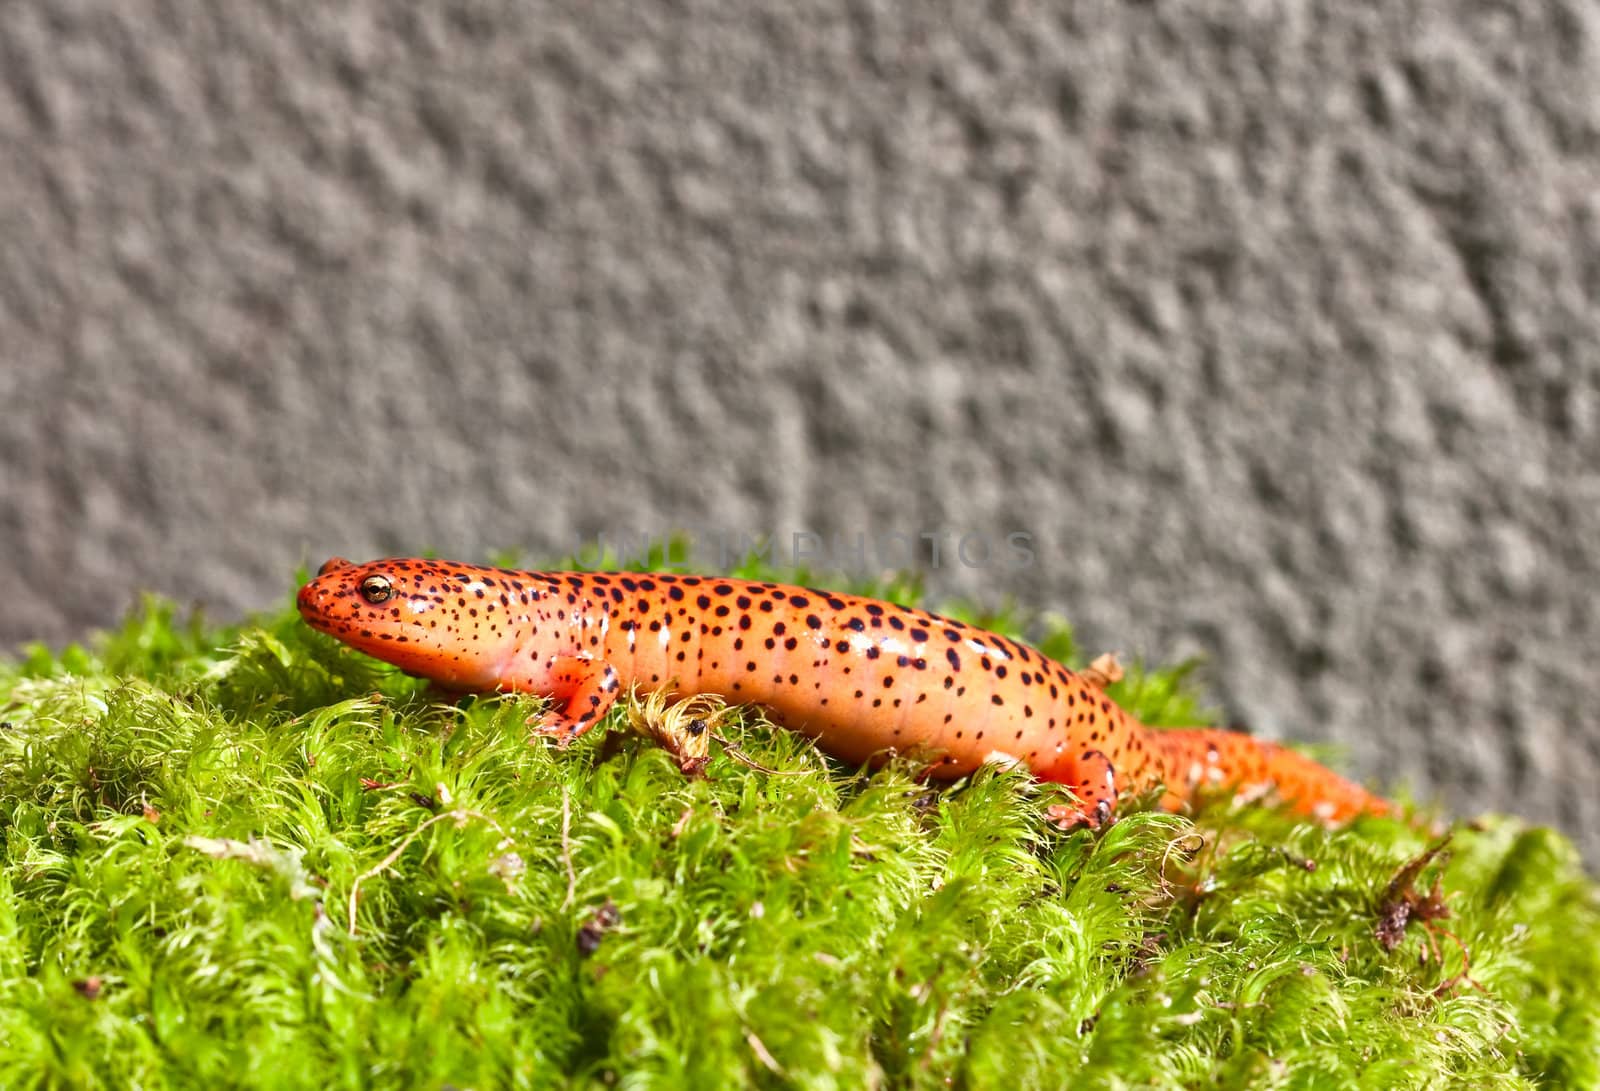 A Northern Red Salamander crawling in green moss